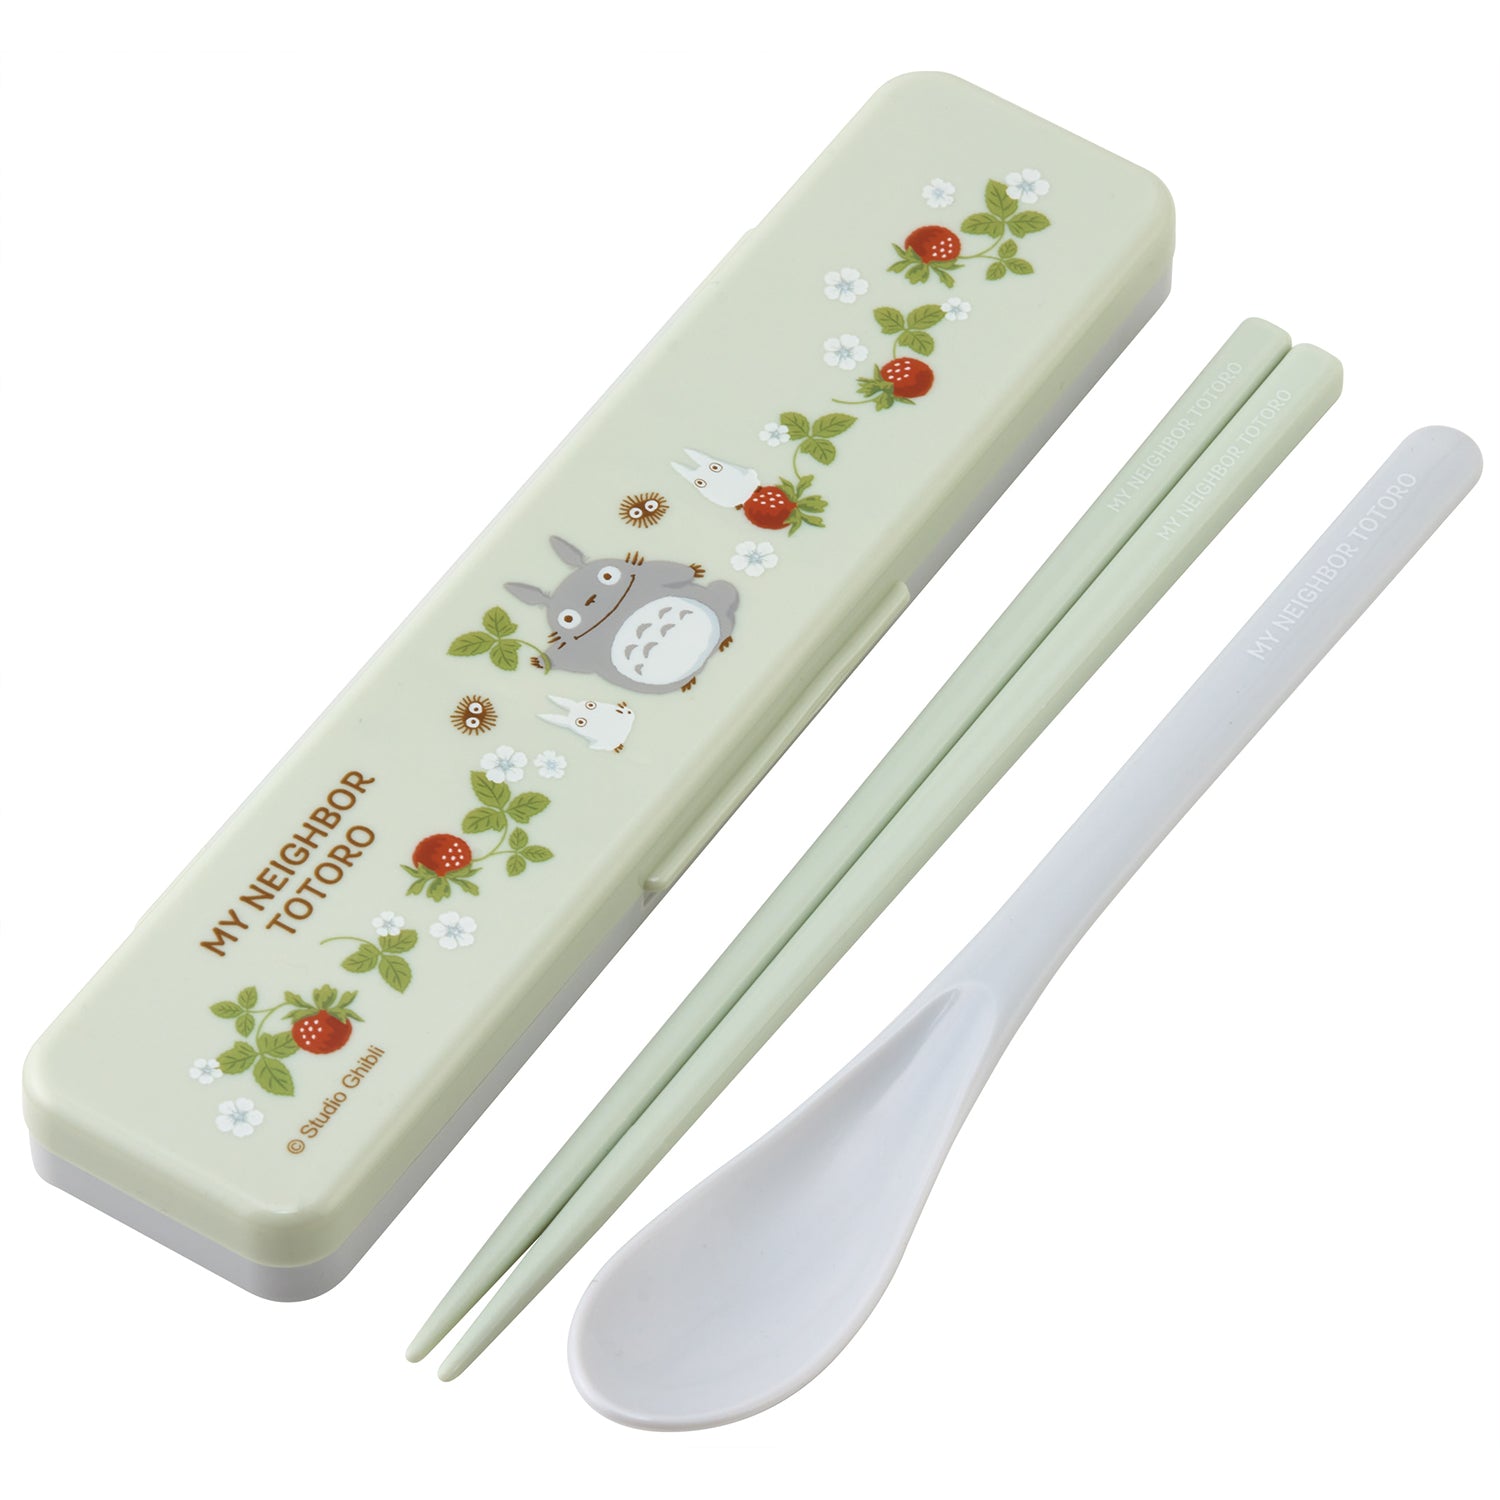 3-in-1 Stainless Steel Fork Spoon Chopsticks Set Portable Utensils with Pen Box - Silver Tone, Green